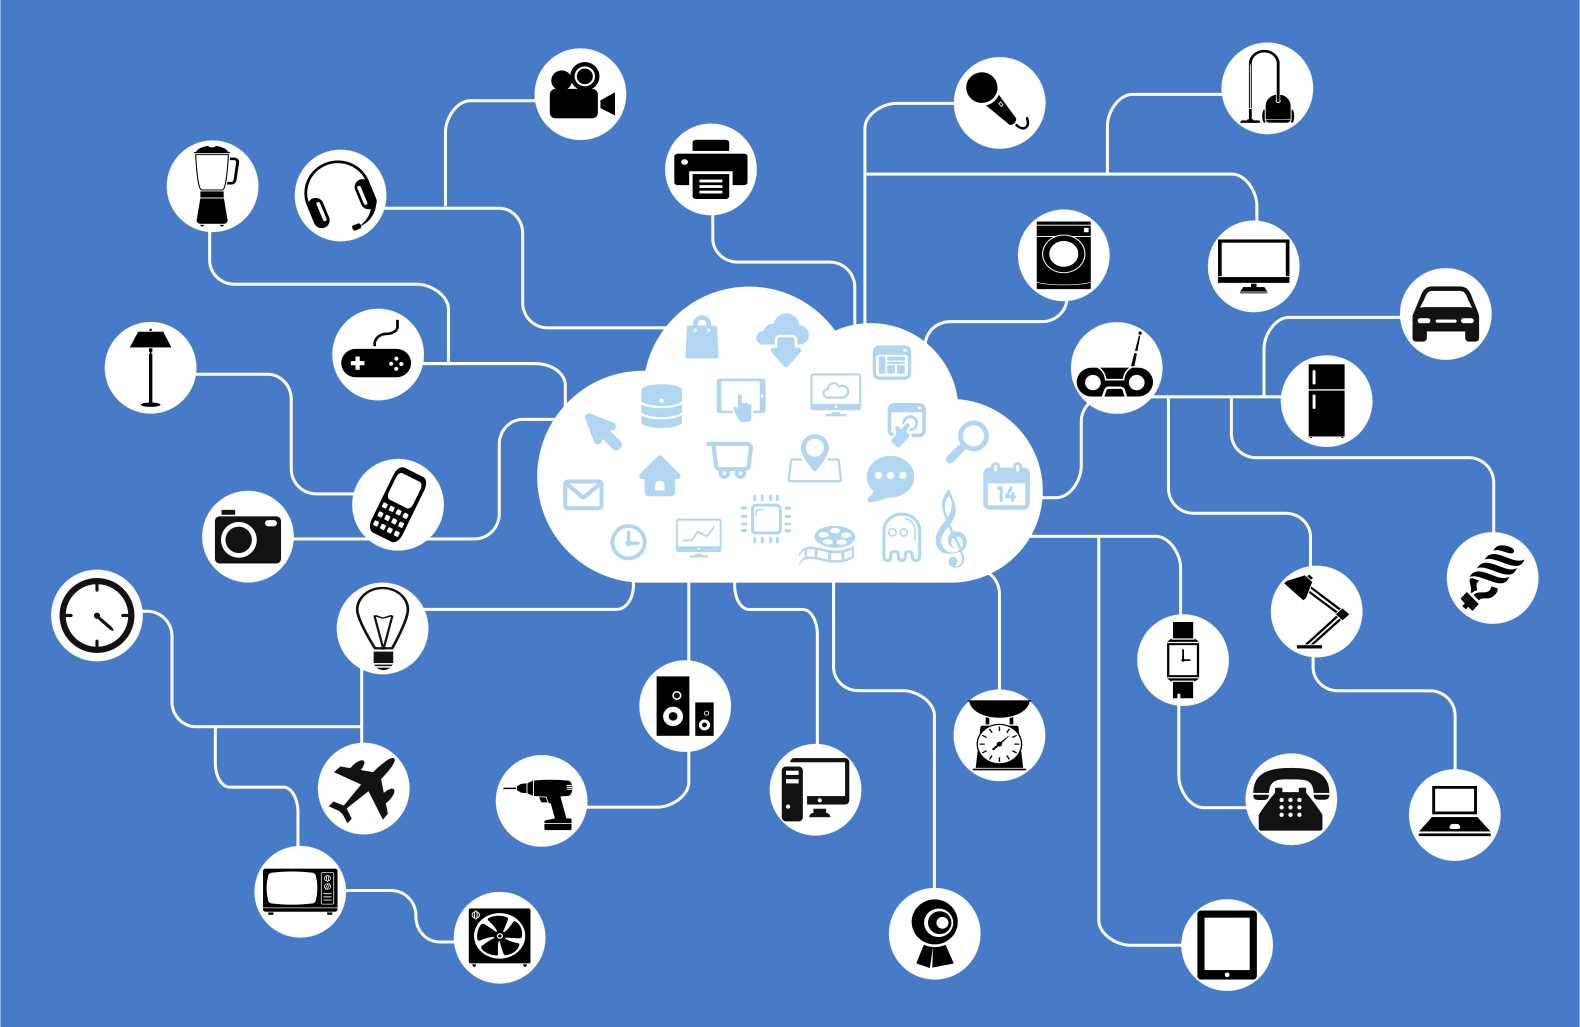 An image of a cloud connected to a large number of icons, each of which symbolise a device that could be connected to in the internet of things.
For example, one shows a lightbulb, one shows a washing machine, and one shows a smartwatch.